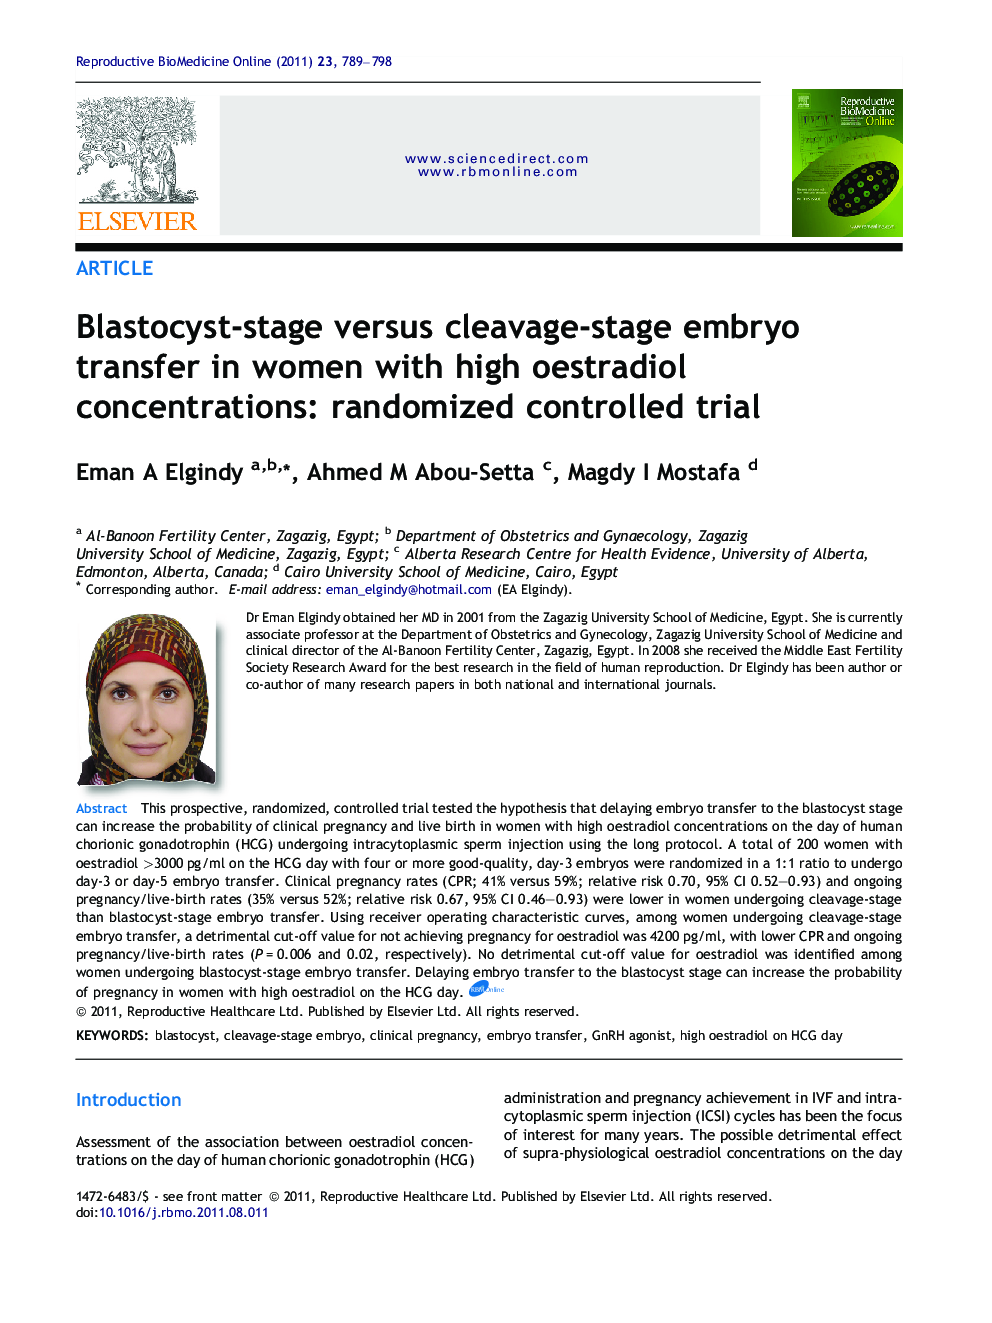 Blastocyst-stage versus cleavage-stage embryo transfer in women with high oestradiol concentrations: randomized controlled trial 